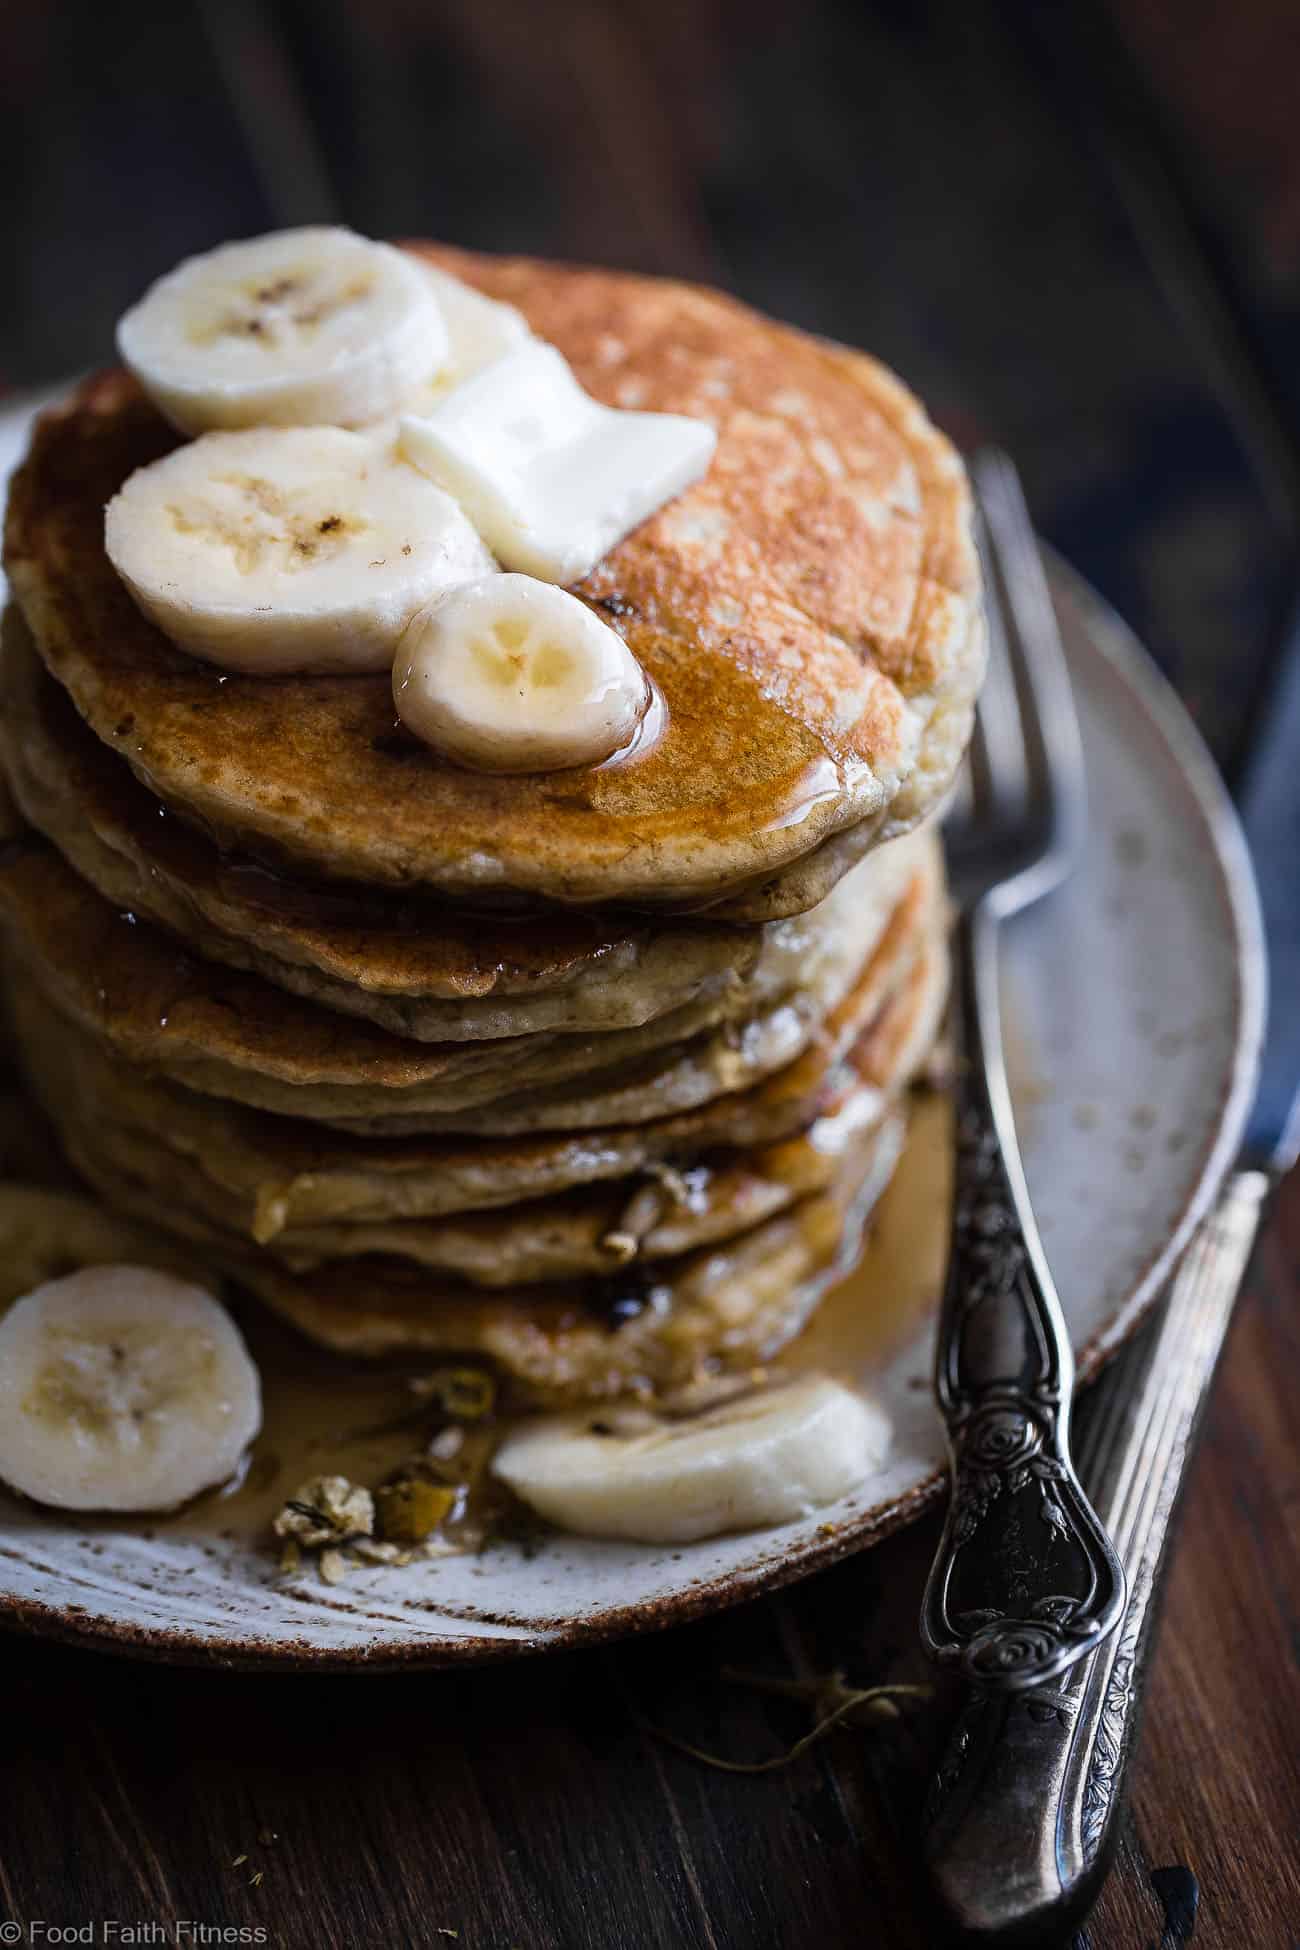 Easy Paleo Banana Pancakes with Coconut Flour - These quick and easy banana pancakes are naturally sweetened, gluten, grain and dairy free and SO light and fluffy! The perfect healthy start to your day or weekend breakfast! | Foodfaithfitness.com | @FoodFaithFit